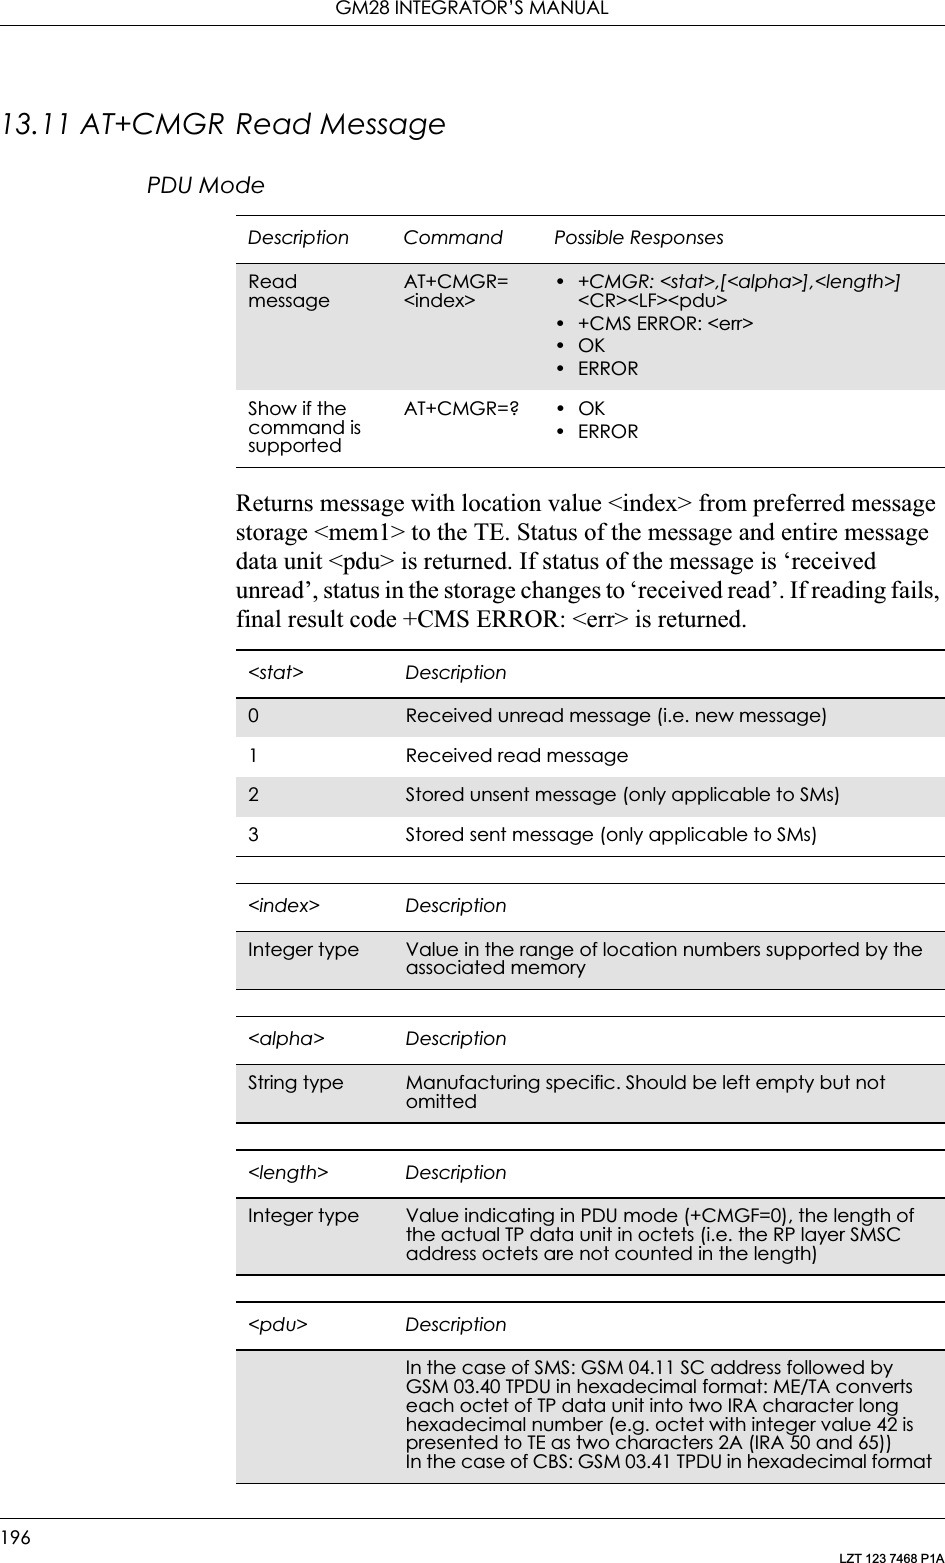 GM28 INTEGRATOR’S MANUAL196LZT 123 7468 P1A13.11 AT+CMGR Read MessagePDU ModeReturns message with location value &lt;index&gt; from preferred message storage &lt;mem1&gt; to the TE. Status of the message and entire message data unit &lt;pdu&gt; is returned. If status of the message is ‘received unread’, status in the storage changes to ‘received read’. If reading fails, final result code +CMS ERROR: &lt;err&gt; is returned.Description Command Possible ResponsesRead messageAT+CMGR= &lt;index&gt;•+CMGR: &lt;stat&gt;,[&lt;alpha&gt;],&lt;length&gt;] &lt;CR&gt;&lt;LF&gt;&lt;pdu&gt;• +CMS ERROR: &lt;err&gt;•OK• ERRORShow if the command is supportedAT+CMGR=? • OK• ERROR&lt;stat&gt; Description0Received unread message (i.e. new message)1 Received read message2Stored unsent message (only applicable to SMs)3 Stored sent message (only applicable to SMs)&lt;index&gt; DescriptionInteger type Value in the range of location numbers supported by the associated memory&lt;alpha&gt; DescriptionString type Manufacturing specific. Should be left empty but not omitted&lt;length&gt; DescriptionInteger type Value indicating in PDU mode (+CMGF=0), the length of the actual TP data unit in octets (i.e. the RP layer SMSC address octets are not counted in the length)&lt;pdu&gt; DescriptionIn the case of SMS: GSM 04.11 SC address followed by GSM 03.40 TPDU in hexadecimal format: ME/TA converts each octet of TP data unit into two IRA character long hexadecimal number (e.g. octet with integer value 42 is presented to TE as two characters 2A (IRA 50 and 65))In the case of CBS: GSM 03.41 TPDU in hexadecimal format